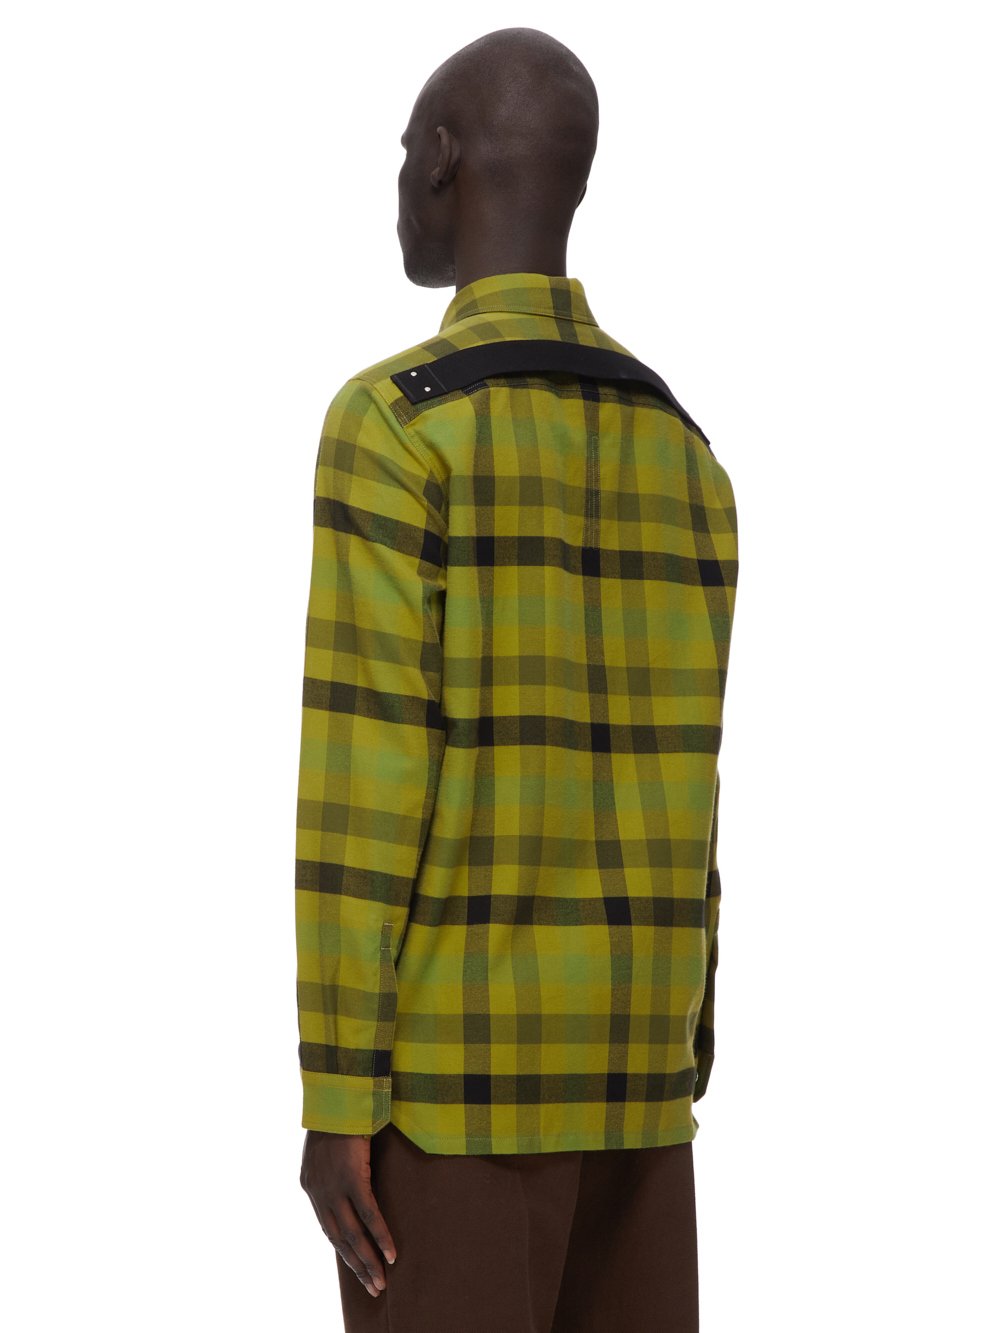 RICK OWENS FW23 LUXOR OUTERSHIRT IN ACID COTTON PLAID